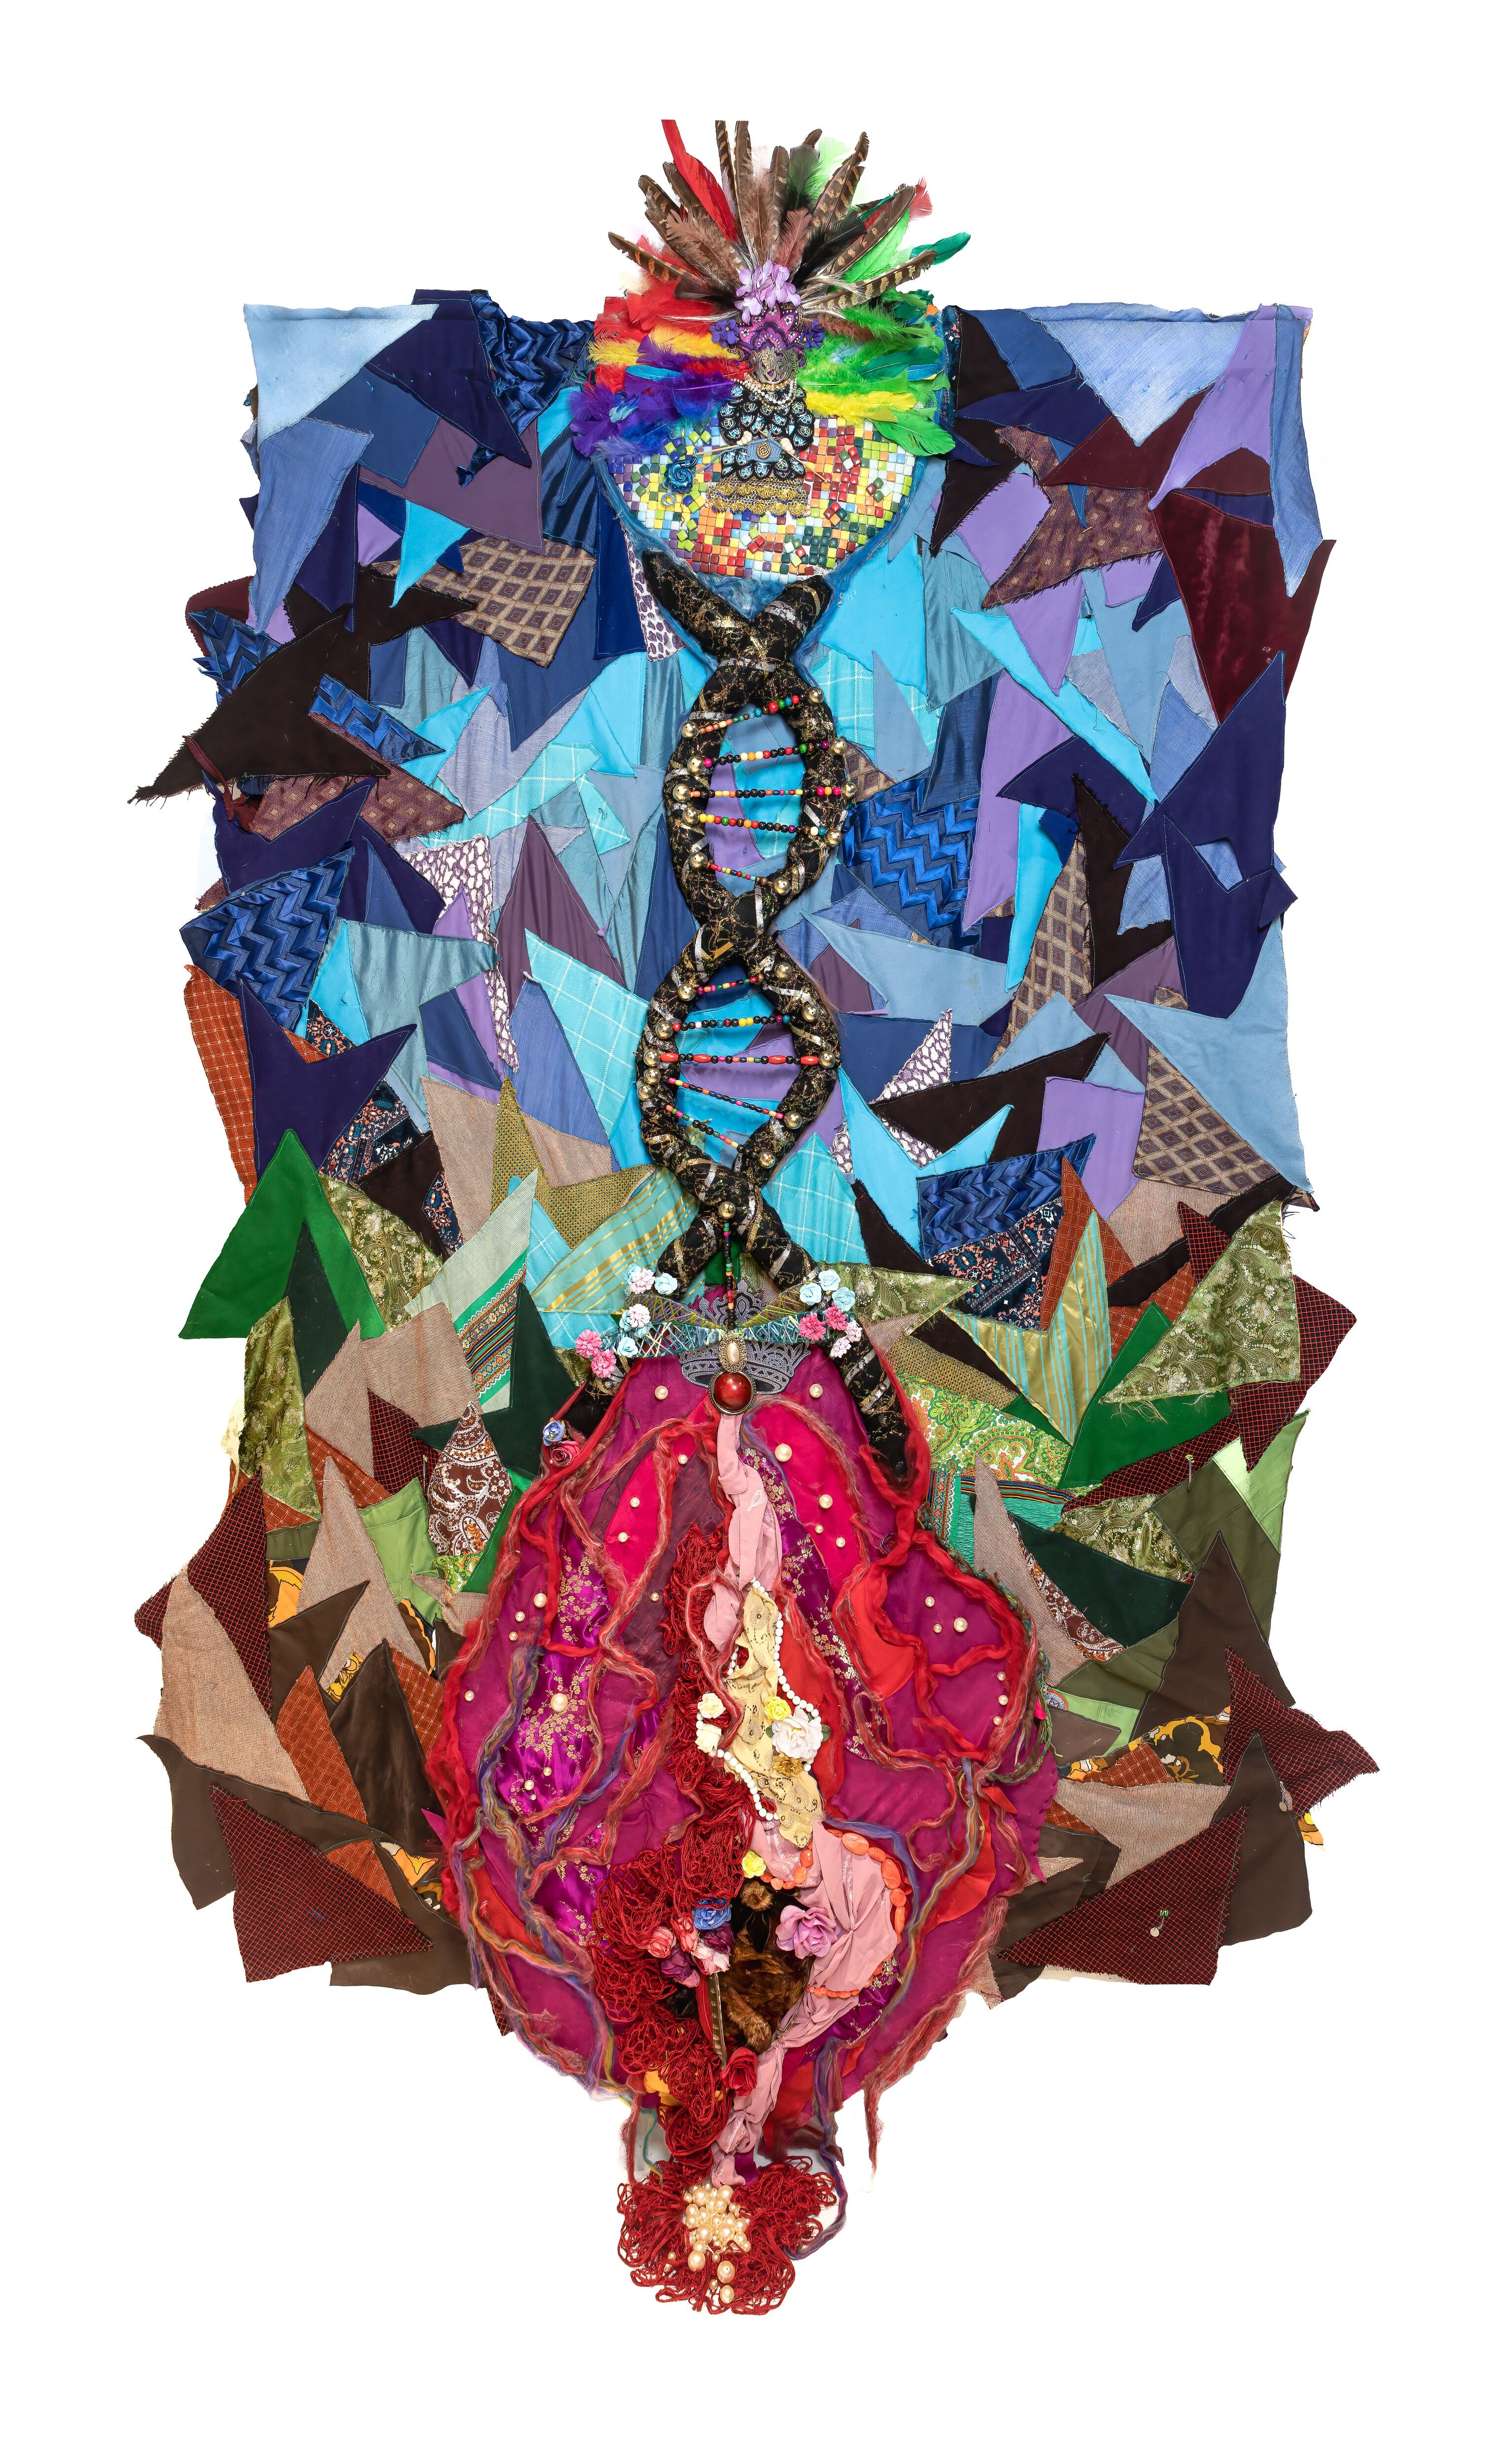 A vertical collage with triangular blue, green, and brown textiles, topped with a colorful crown. A DNA-like textile and jewelry structure bisects the center, ending in a red and pink spiral.